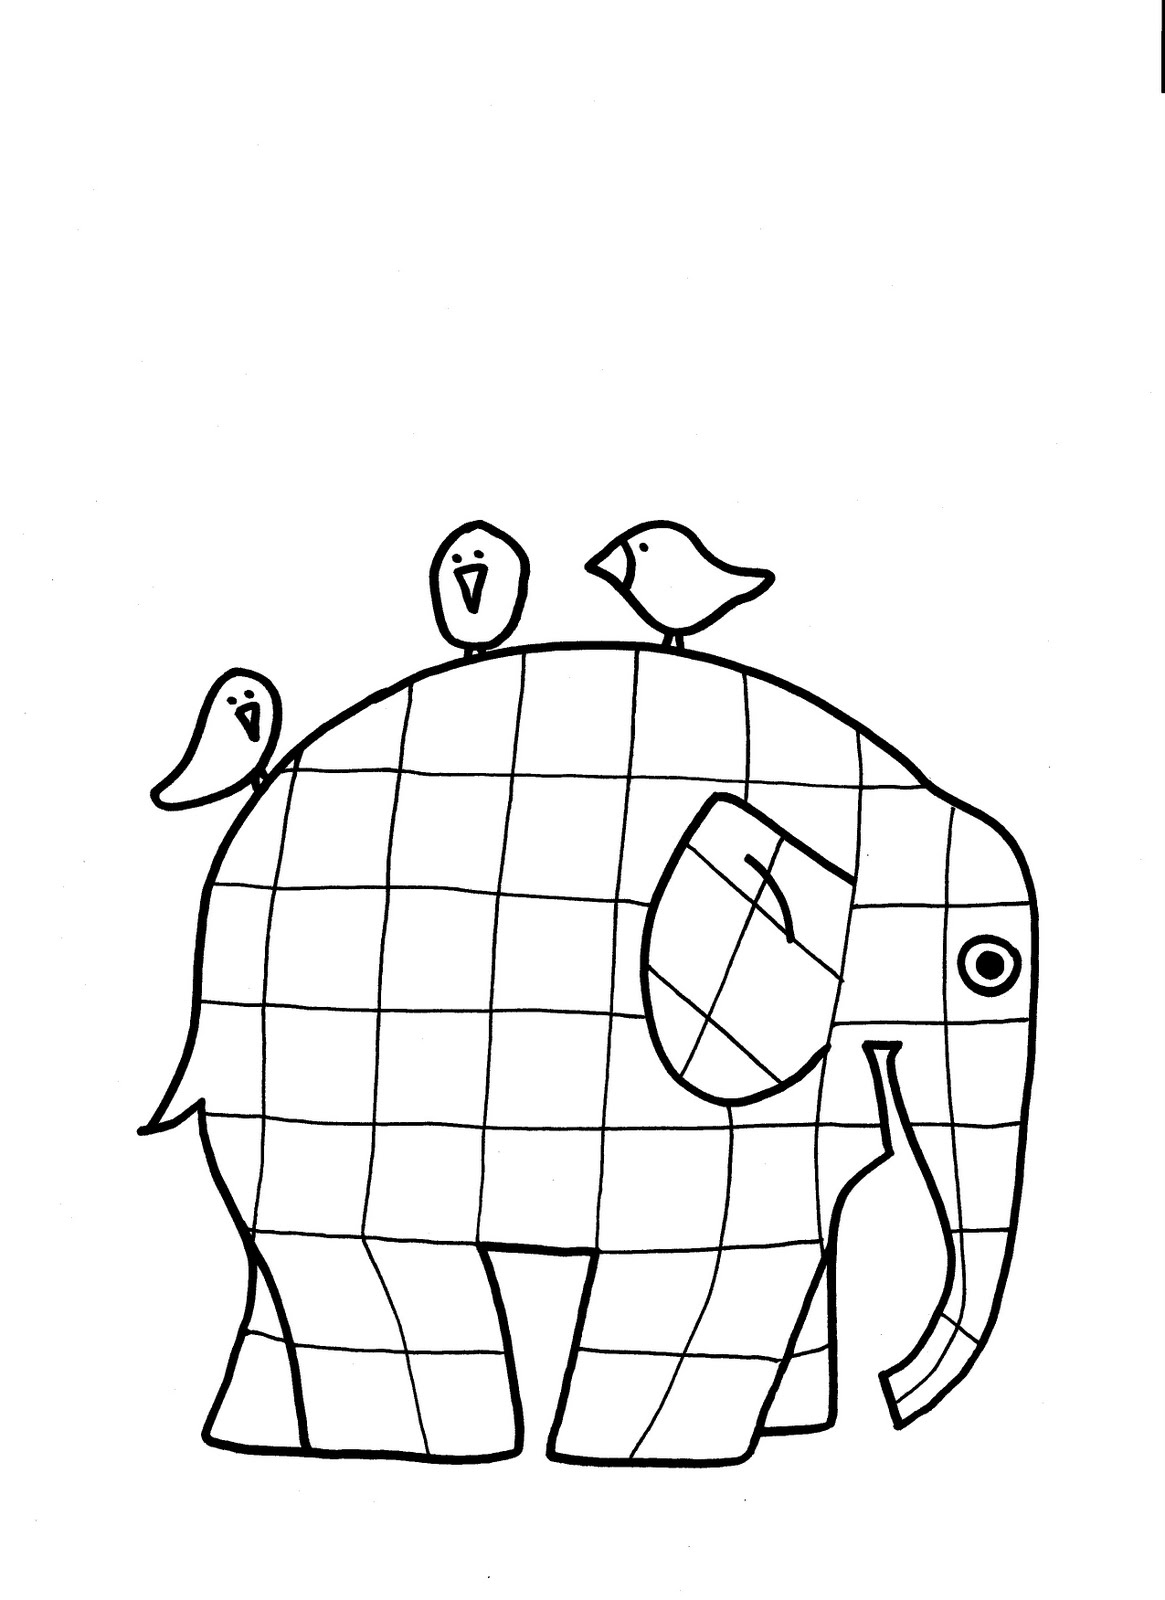 Free printable elephant coloring pages for kids